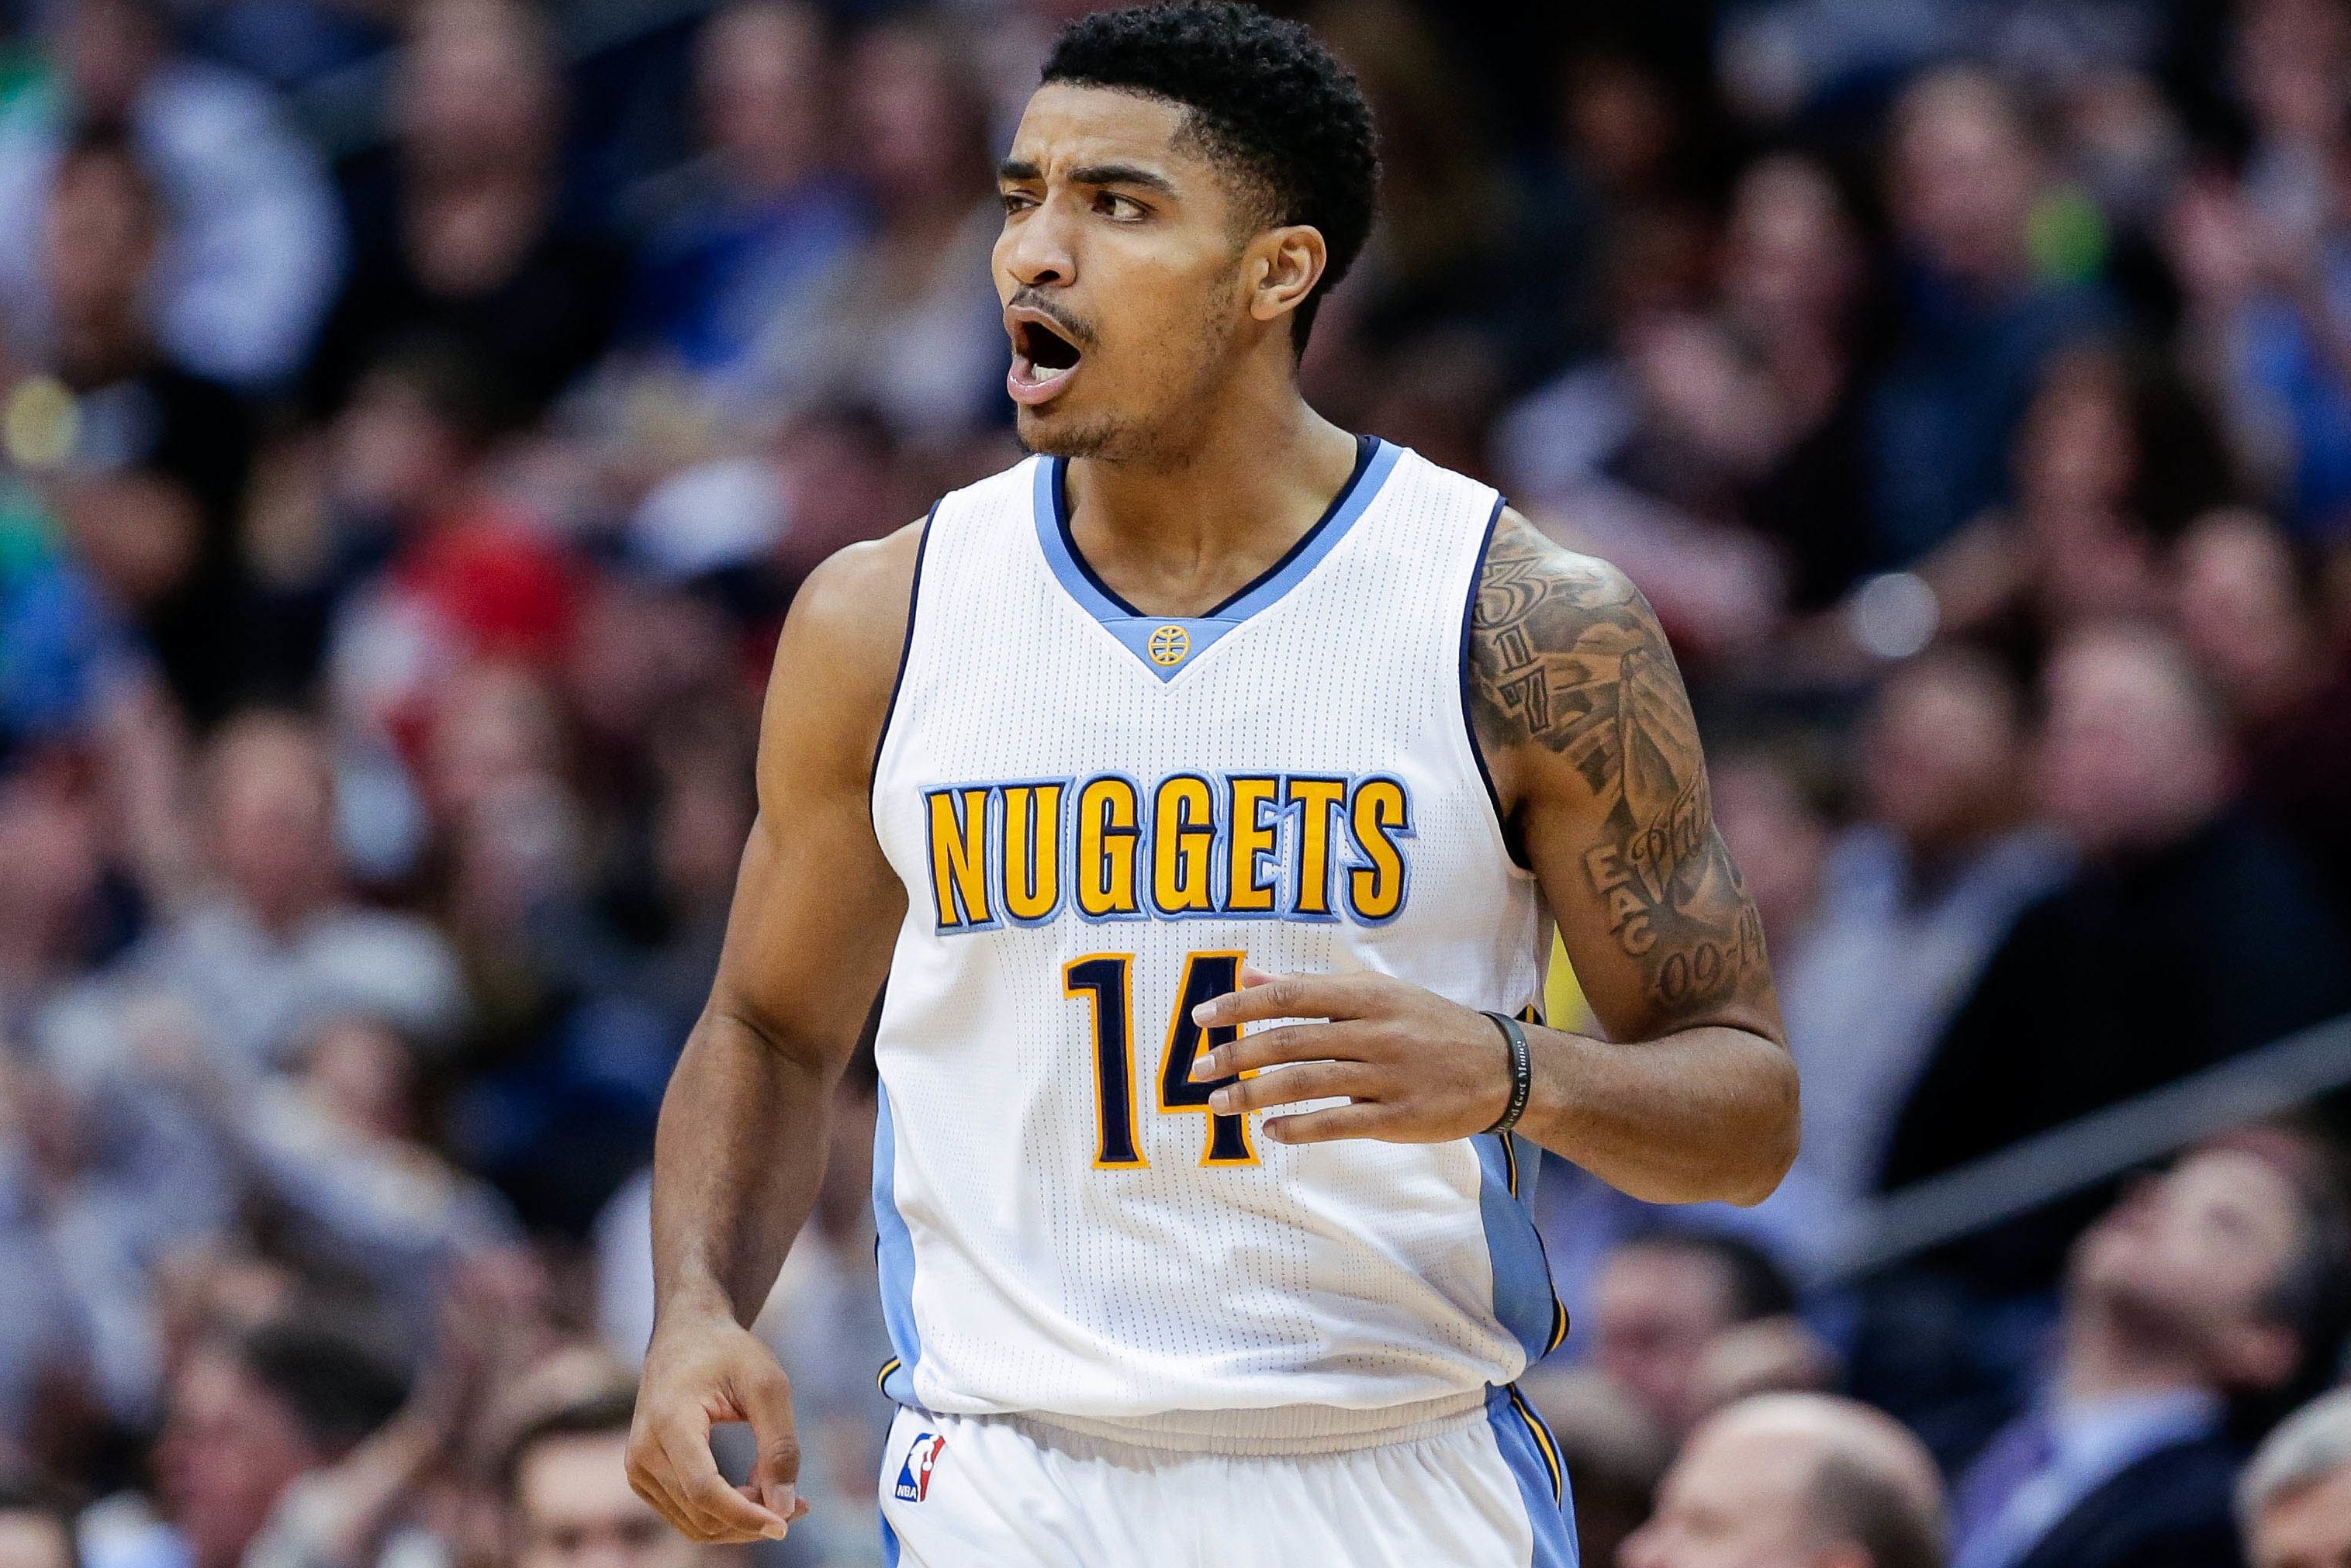 BSN Nuggets weekend mailbag: Mudiay and Under Armour, Gary Harris